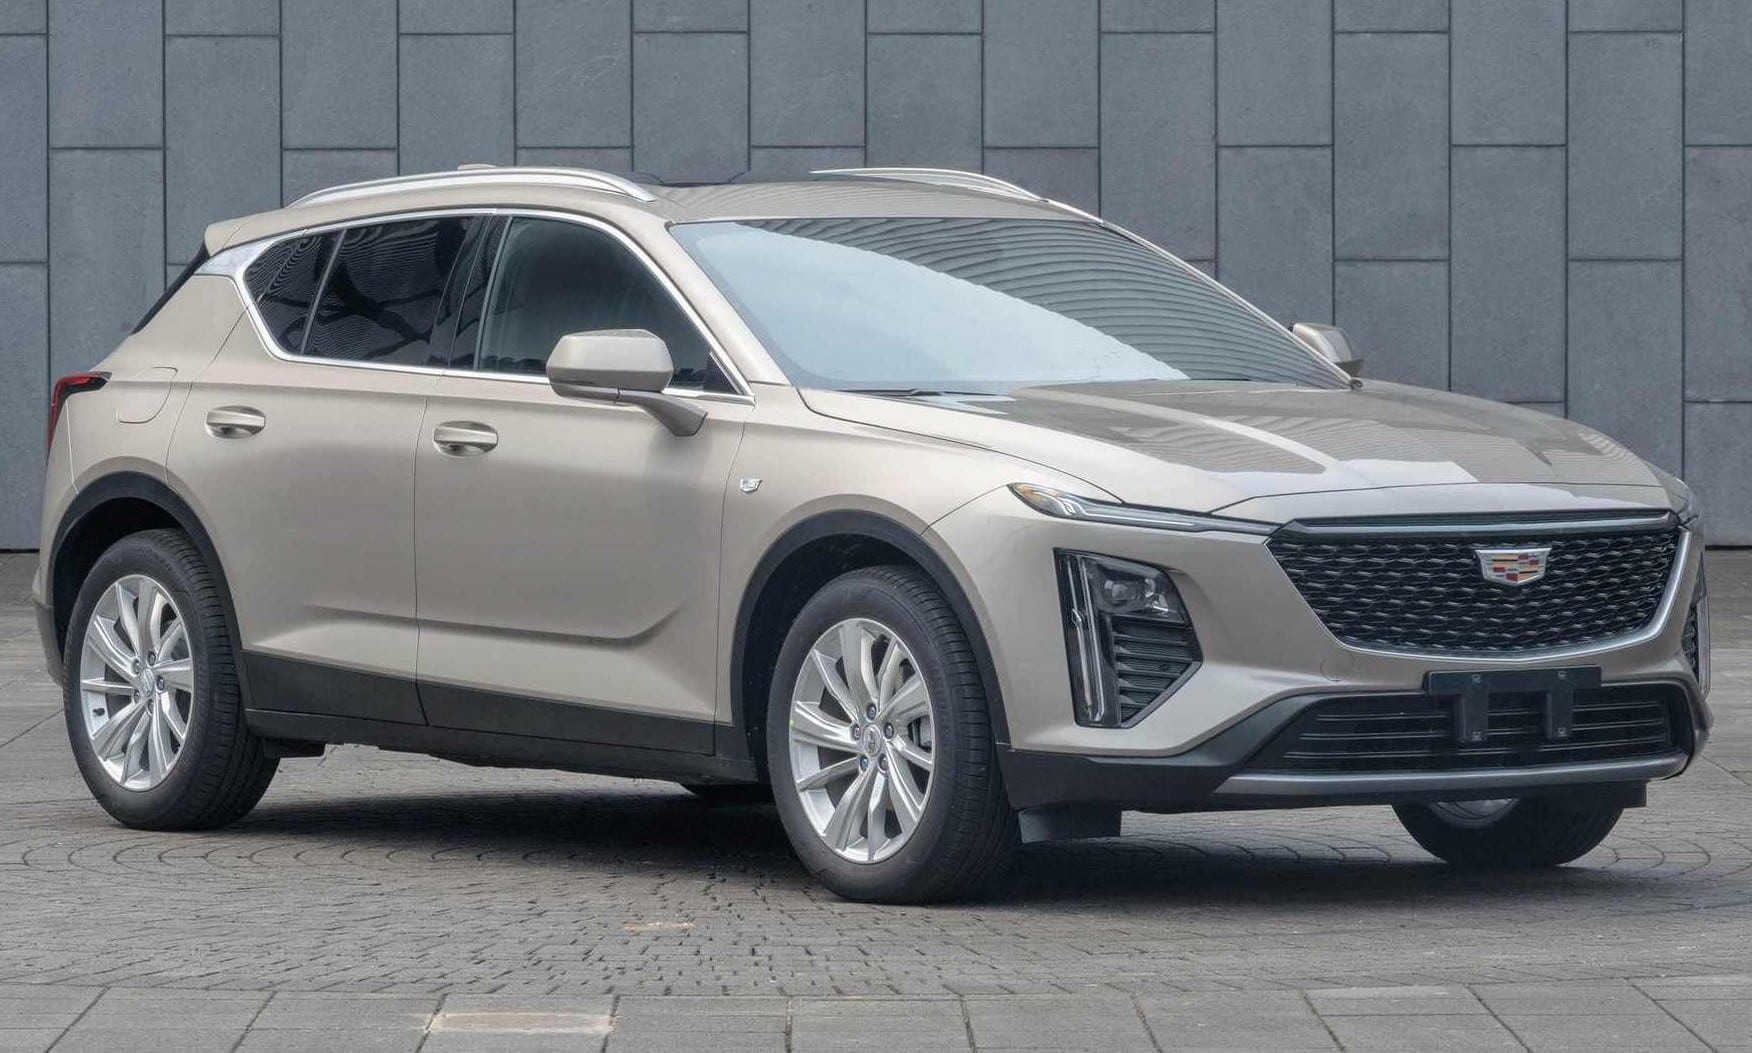 Cadillac GT4 Is A Sporty Compact Crossover SUV For China